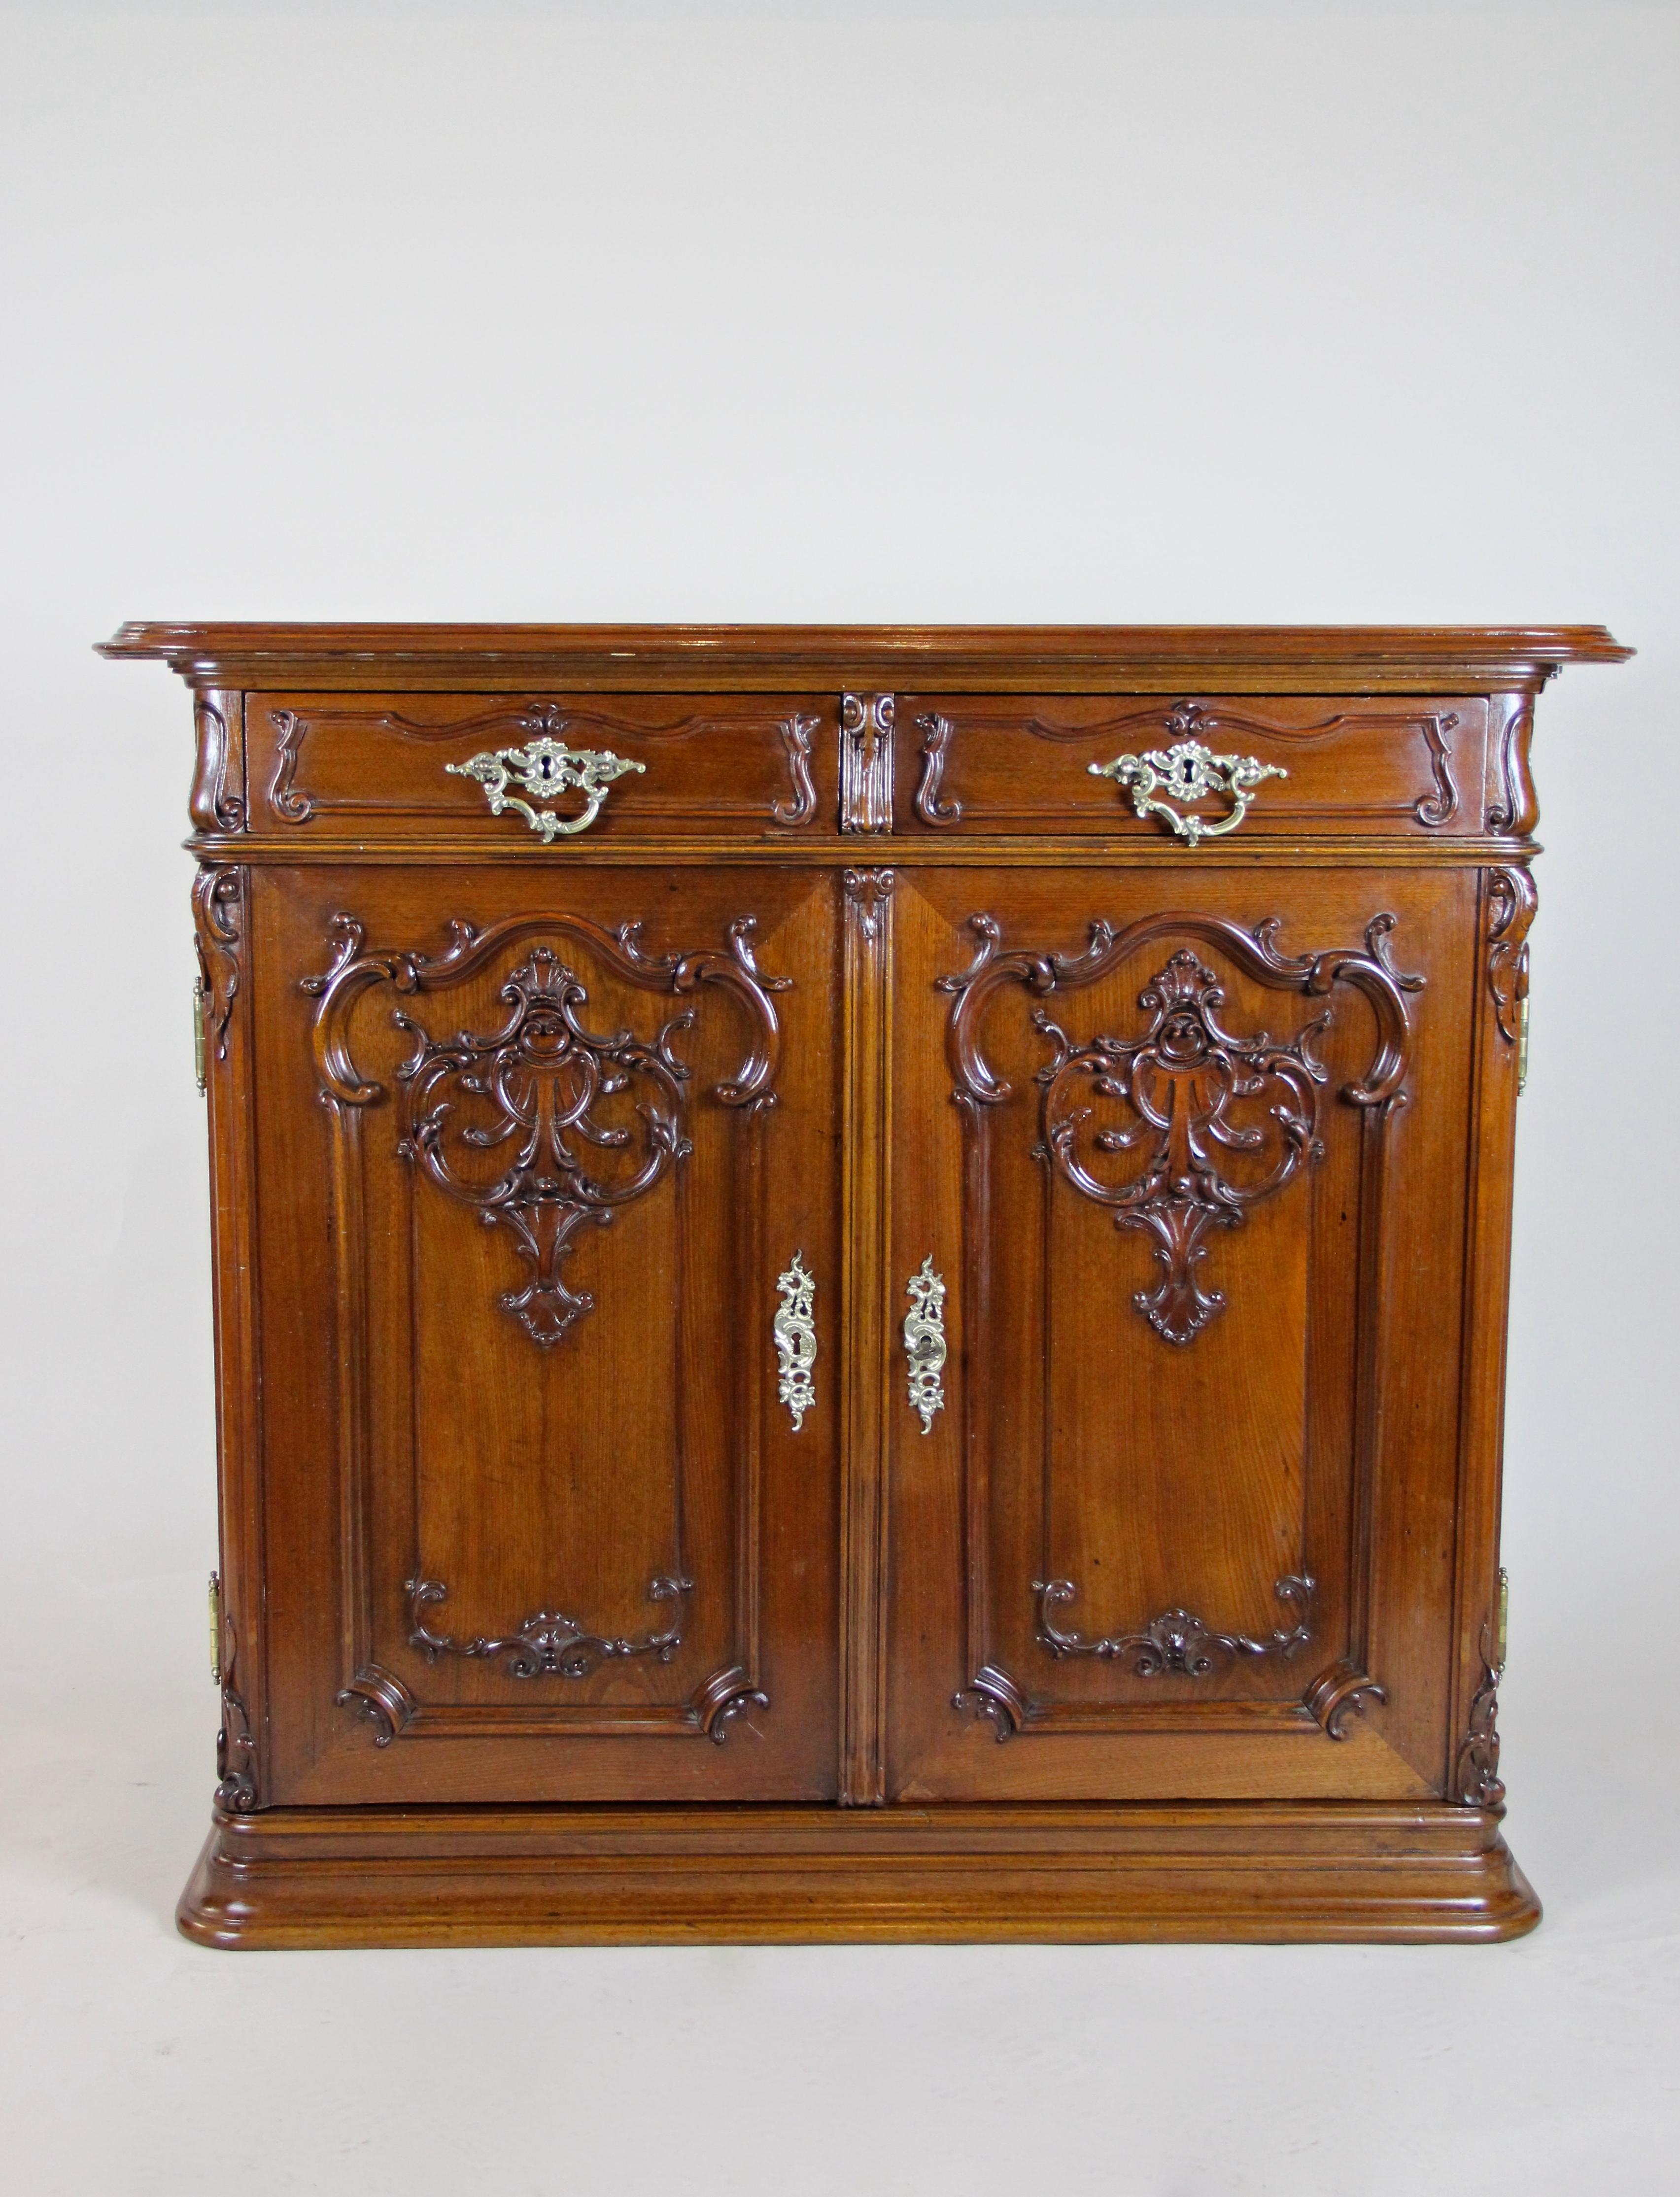 Remarkable Baroque revival commode or Trumeau with fantastic nut wood carvings out of Vienna/ Austria from the end of the 19th century. After an elaborate restoration process it now shows its full beauty again. Made circa 1880, the so-called